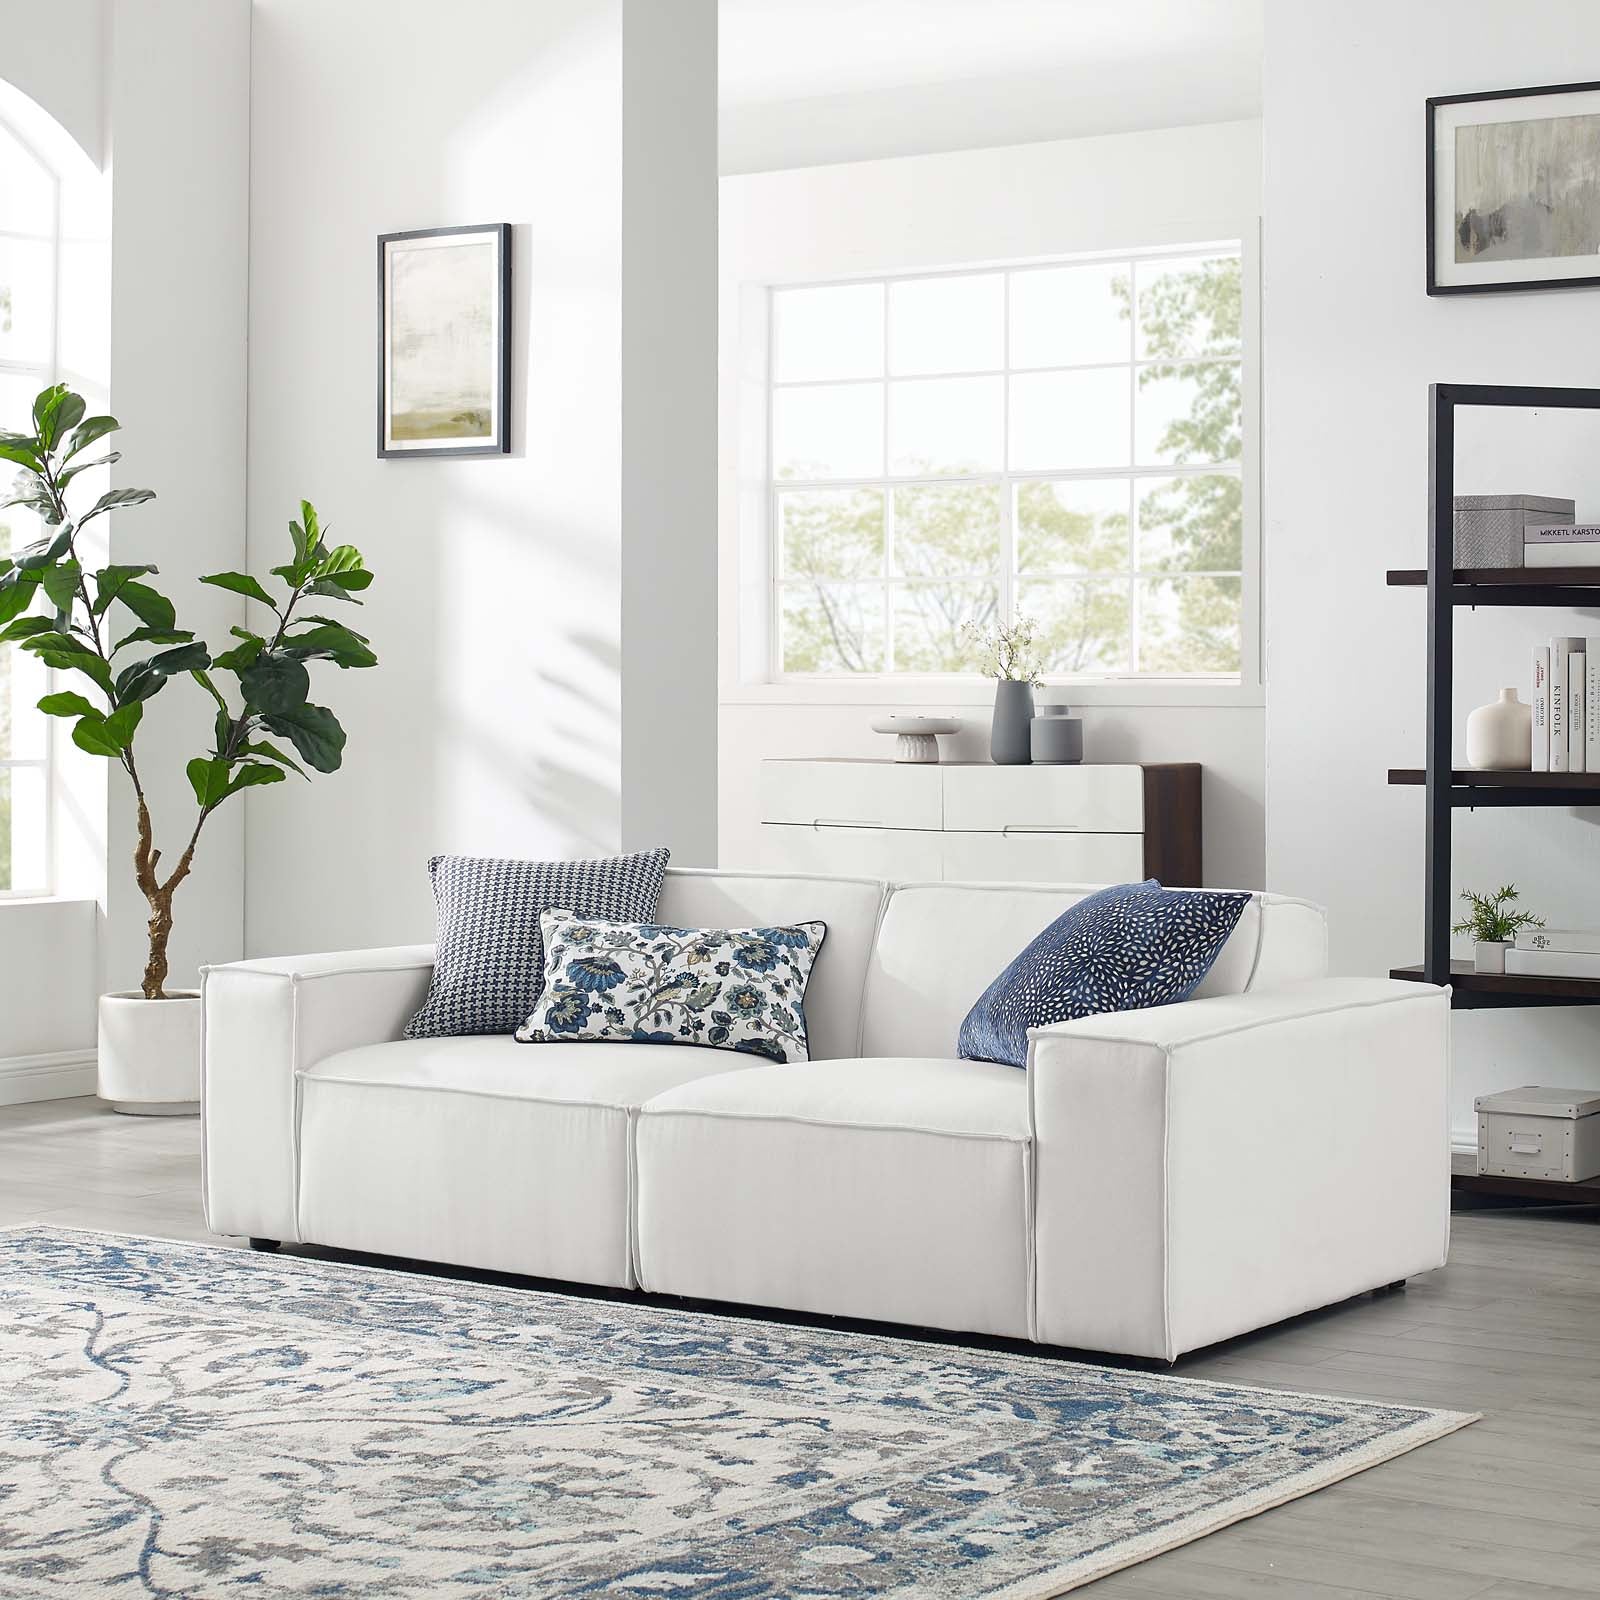 Modway Sectional Sofas - Restore 2-Piece Sectional Sofa White